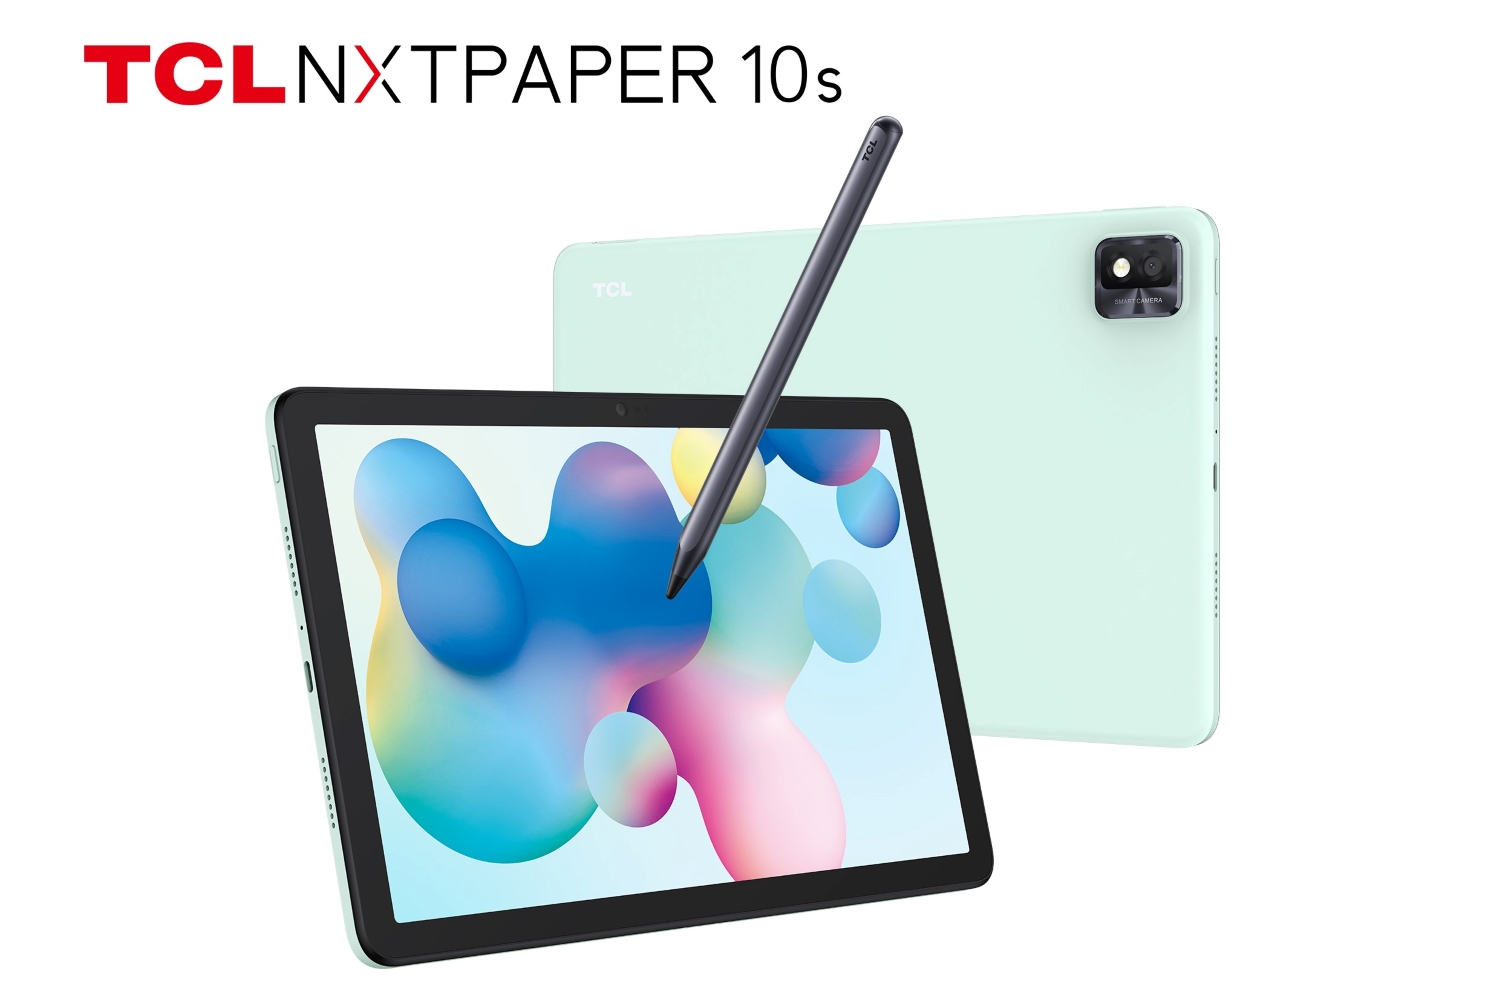 ReMarkable vs TCL NxtPaper 11: What is the difference?